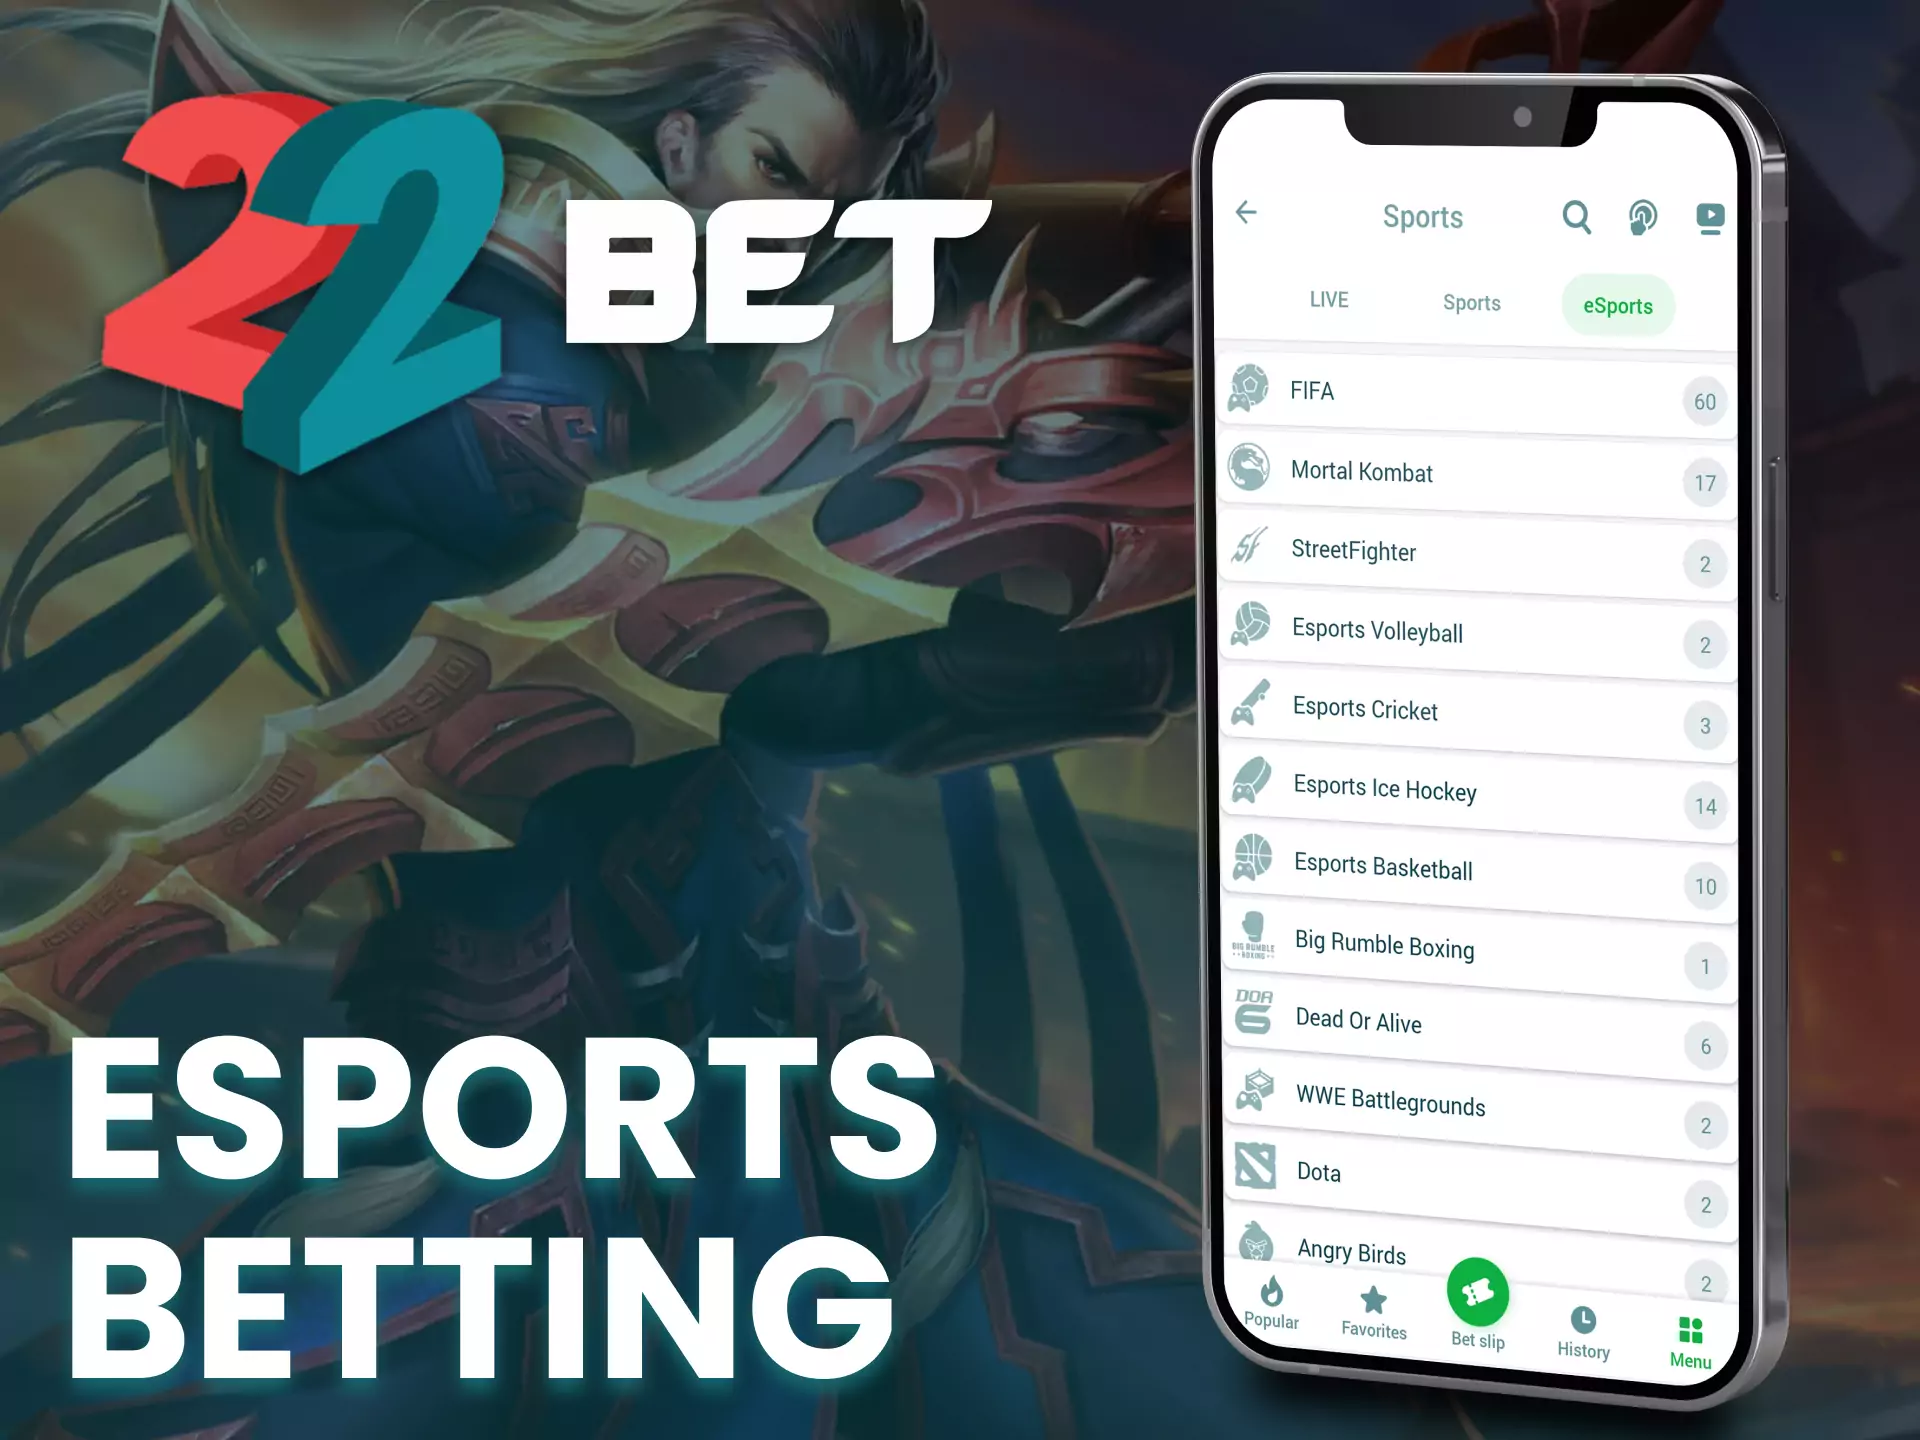 Place your bets on esport in the 22bet app.